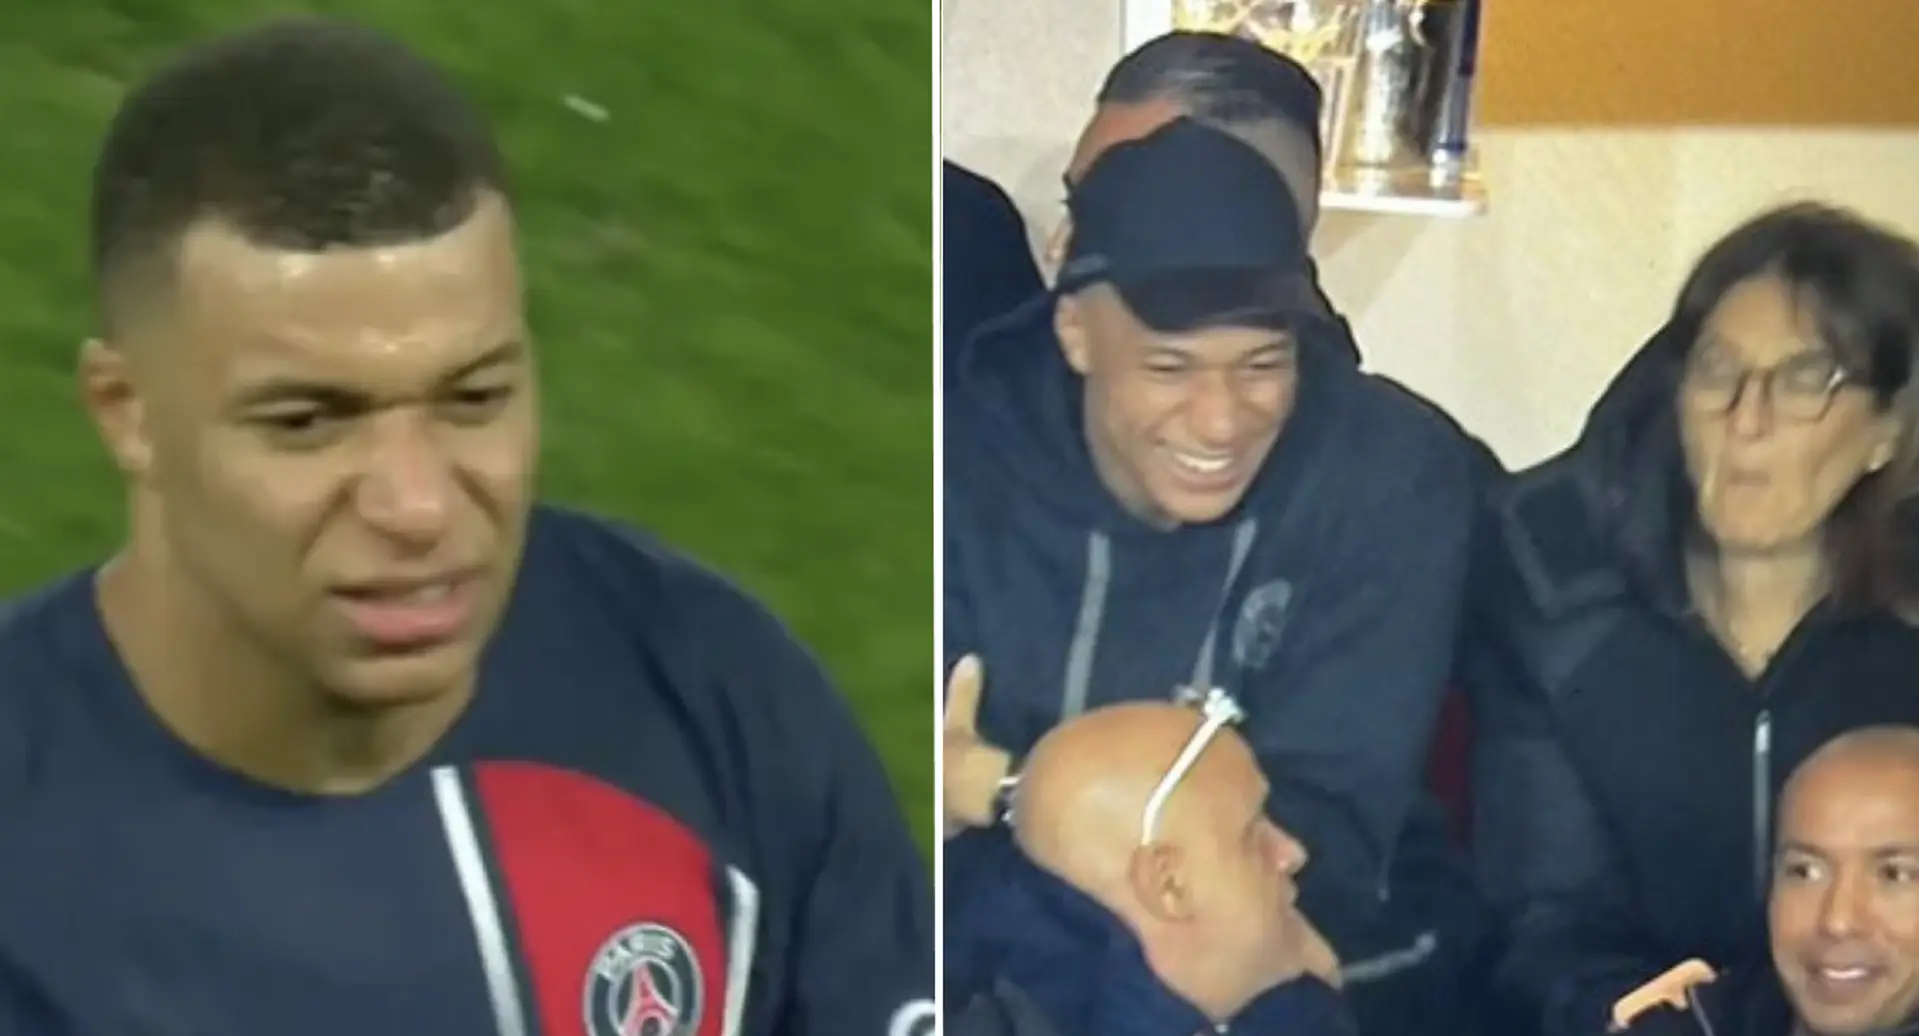 Weird scenes as Mbappe gets subbed off at halftime v Monaco, changes to regular clothes to watch PSG play from the stands with his mom